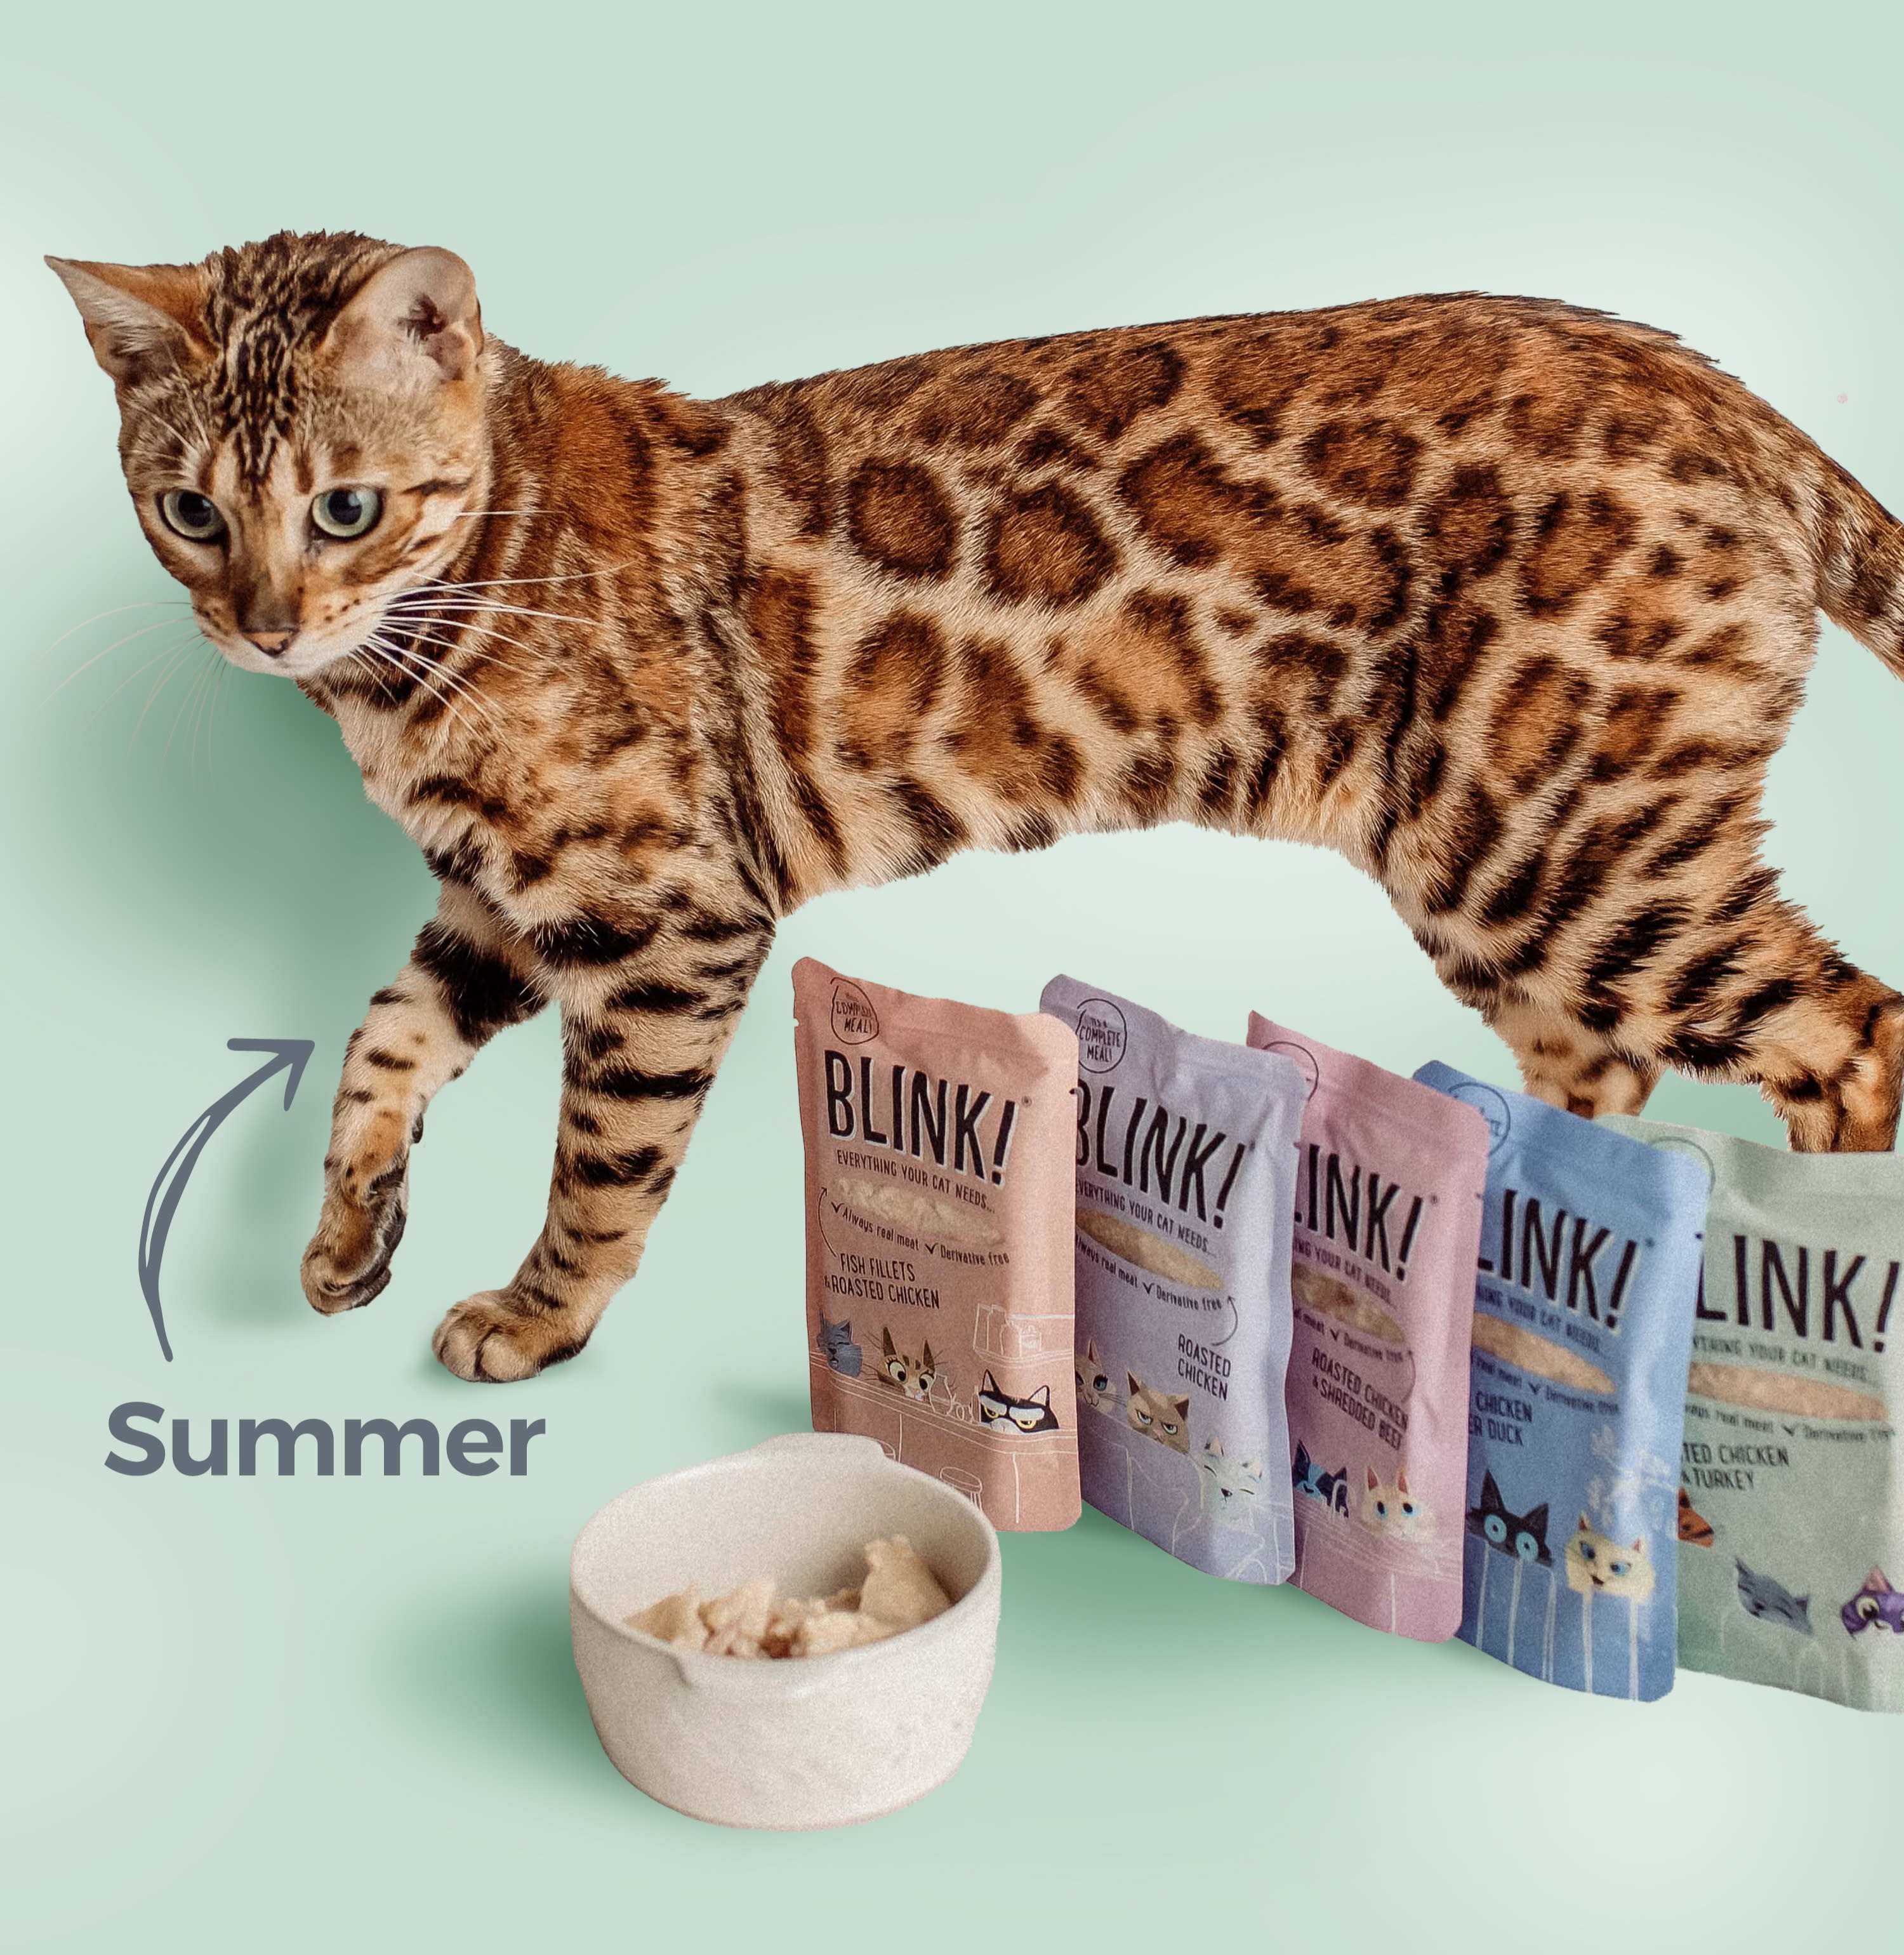 Leopard print cat with Blink food